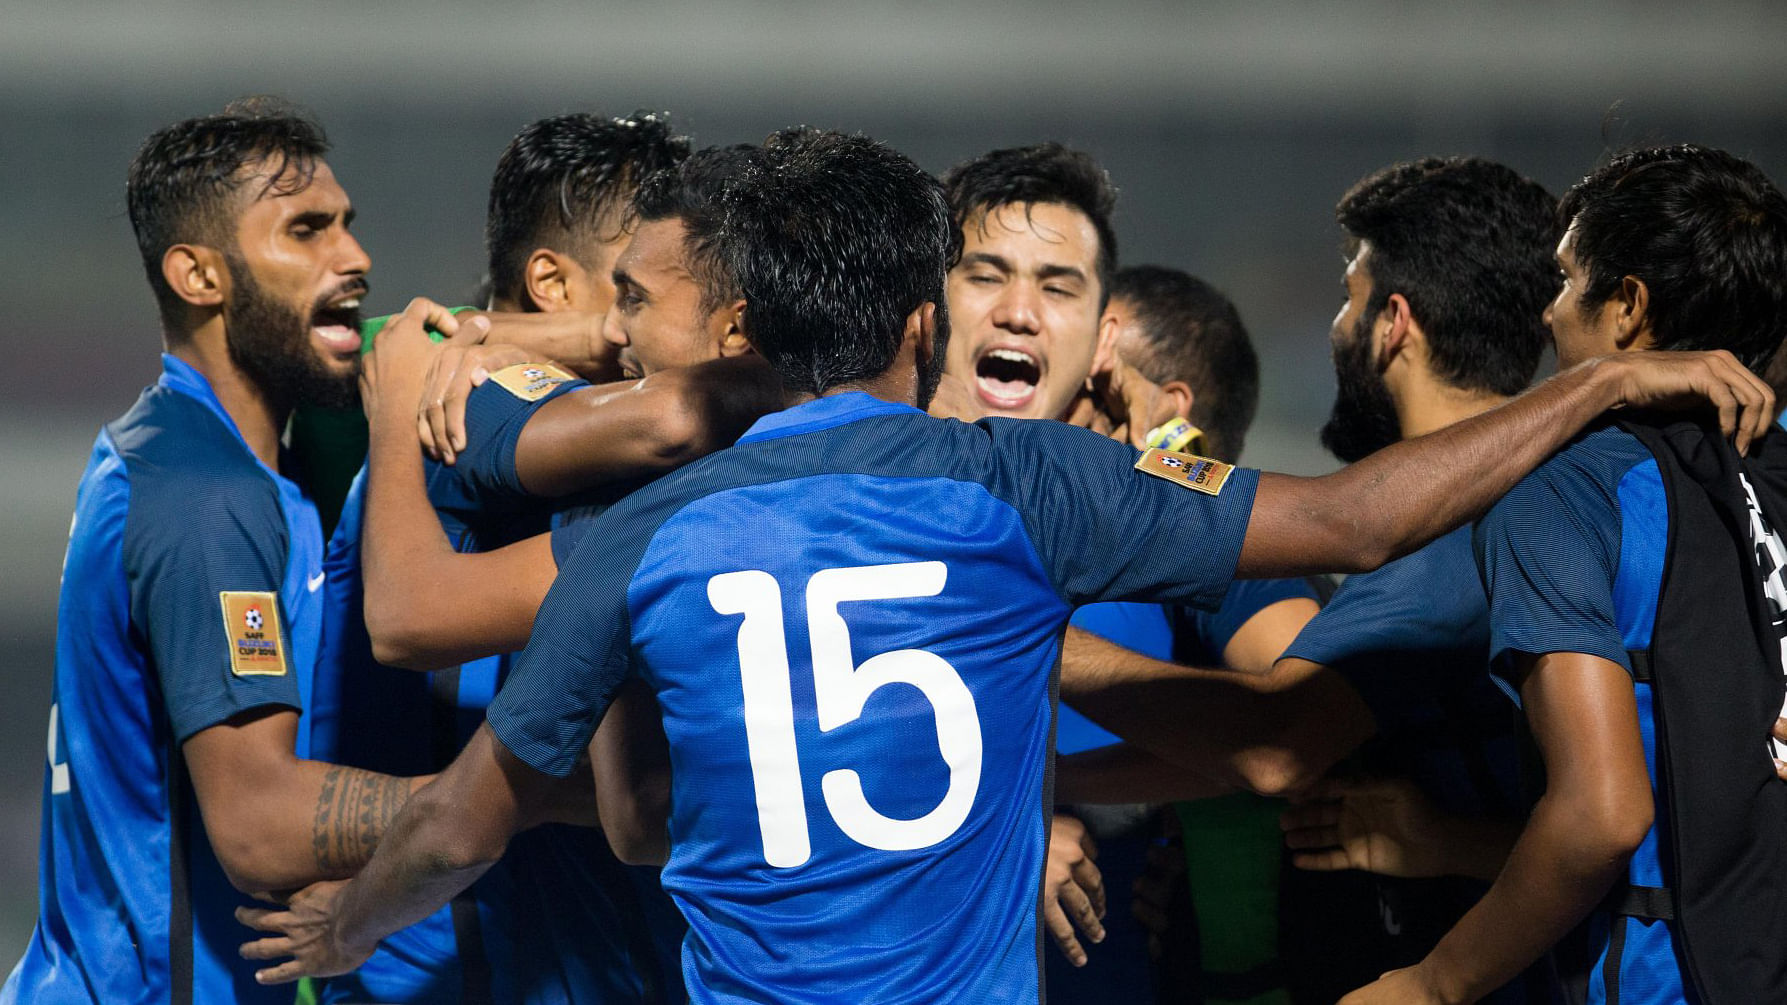 Manvir Singh scored two goals for India as they beat Pakistan 3-1 in the SAFF Cup.